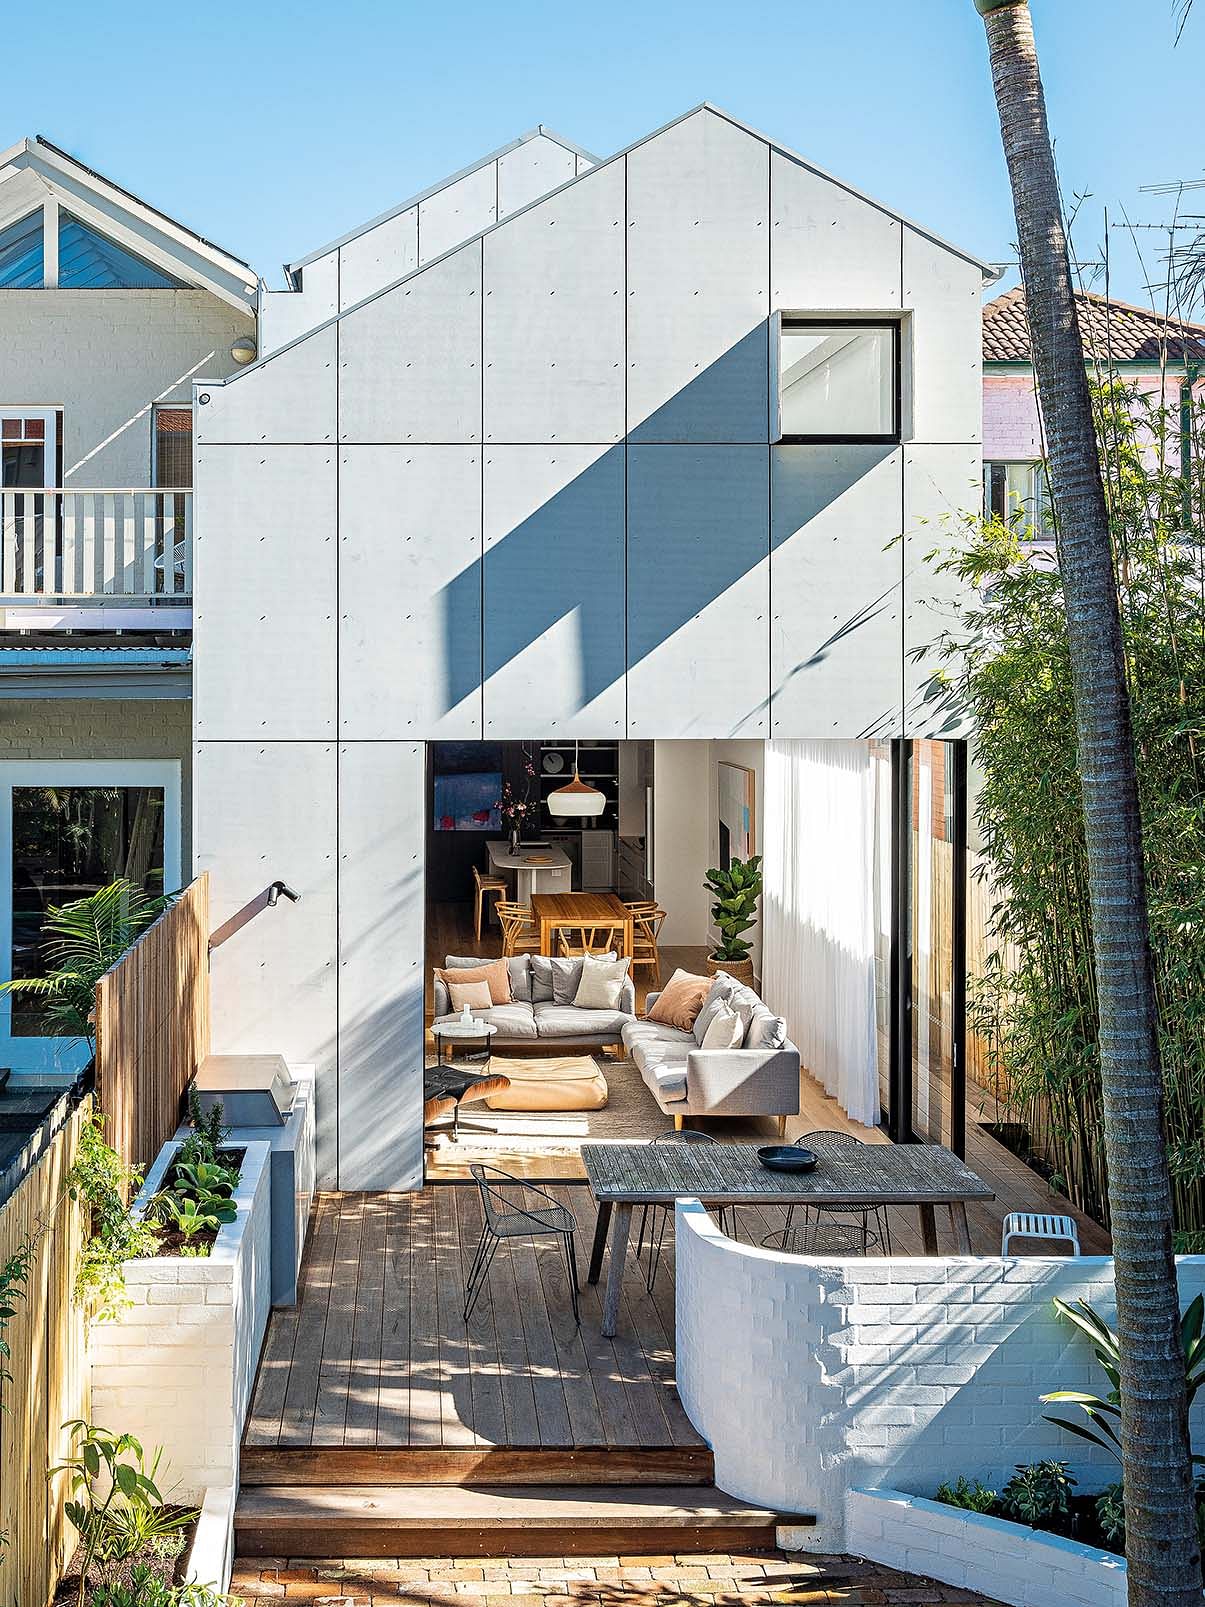 The backyard was designed by Pepo Botanic. The exterior is clad in James Hardie fibre cement boards.